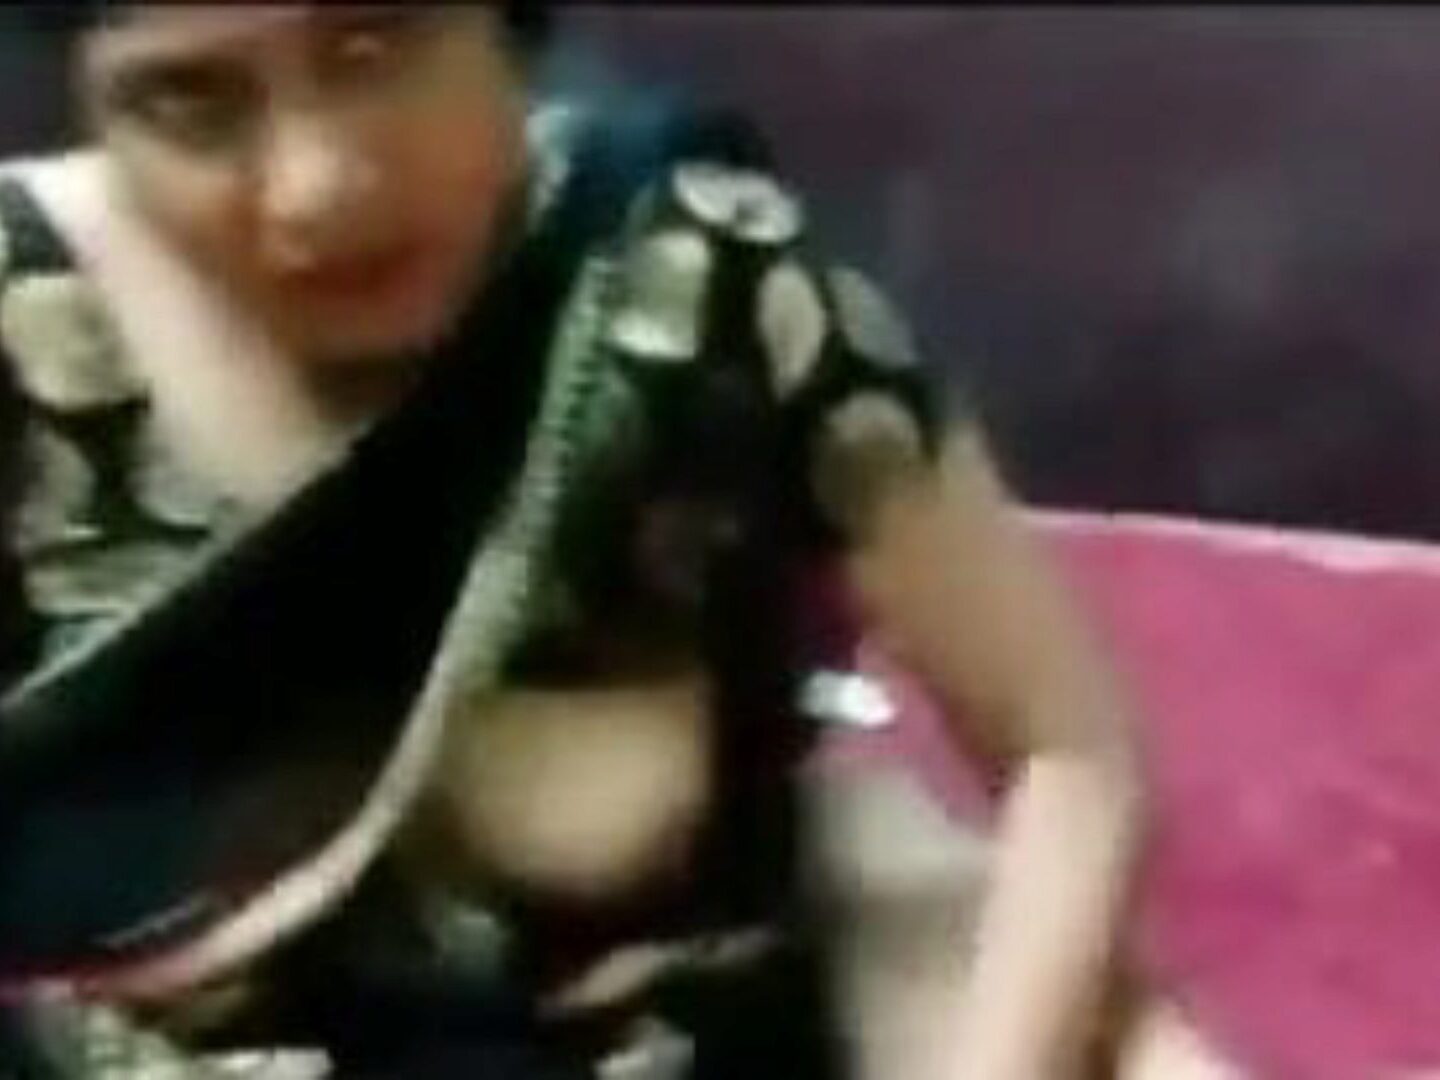 Giral Sex Video Hind Hd - Indian Cute Girl With Forenyear Porn Sex Video - Nude Clap